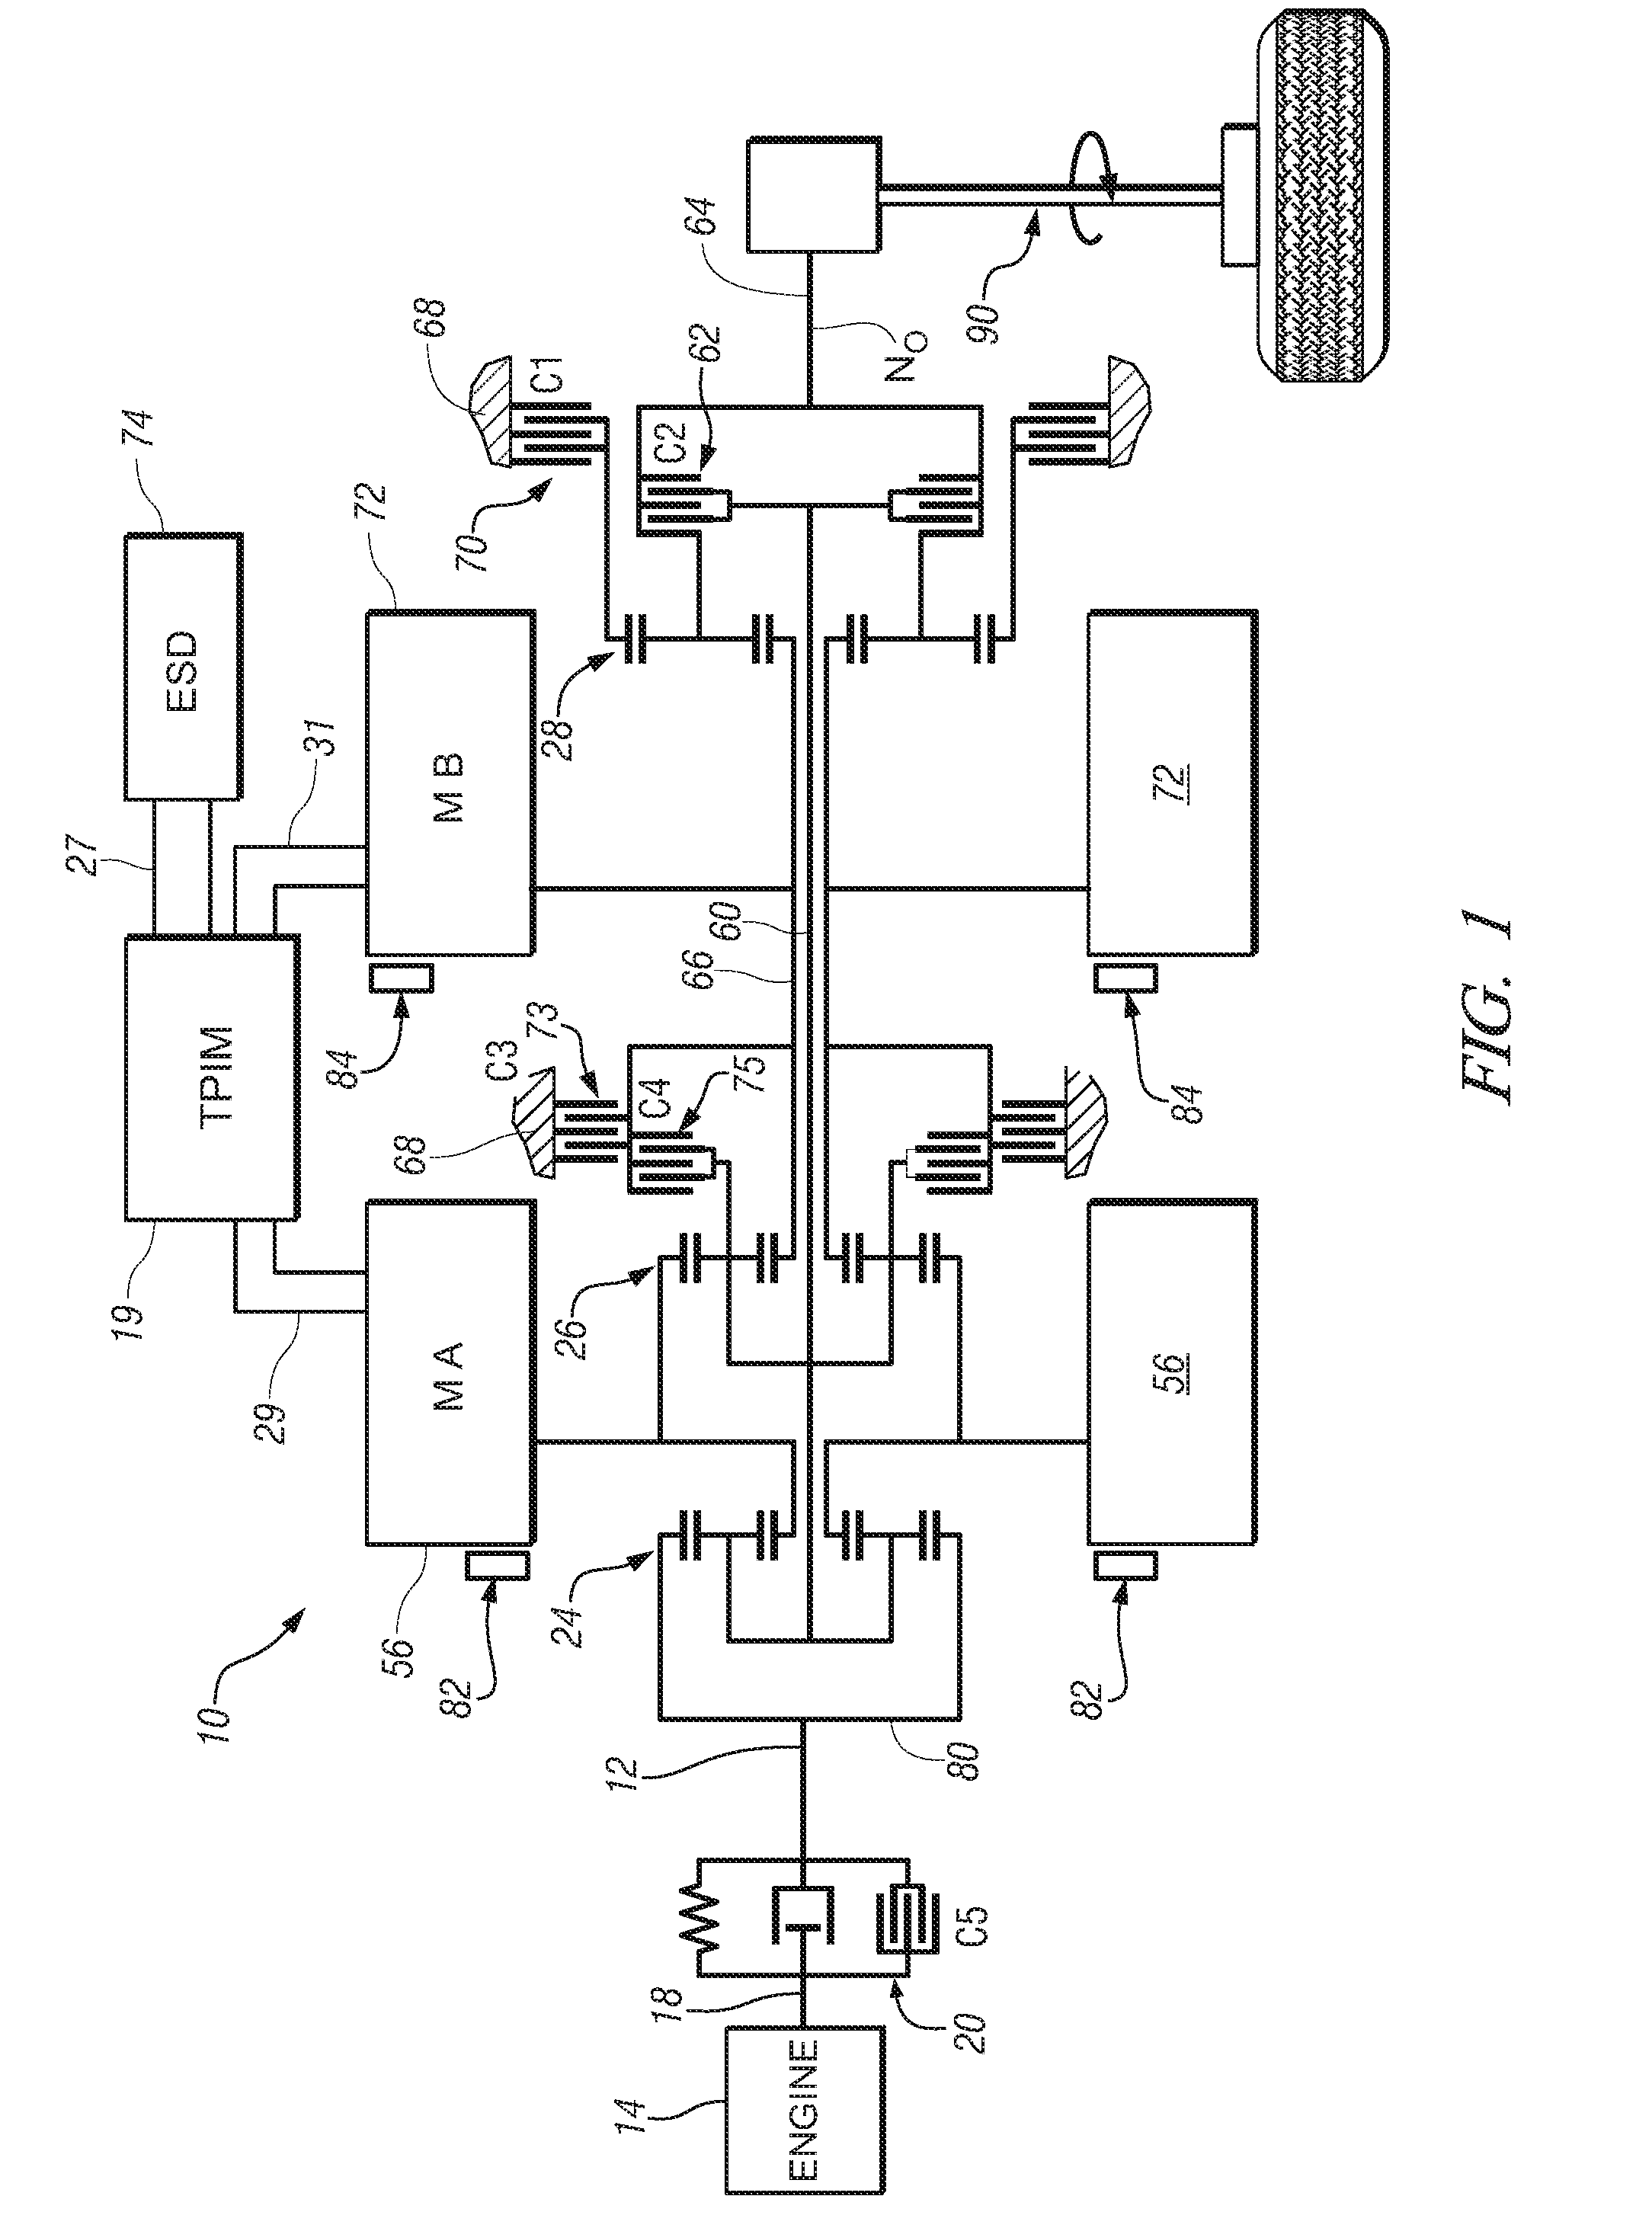 Method and apparatus to determine rotational position of an internal combustion engine